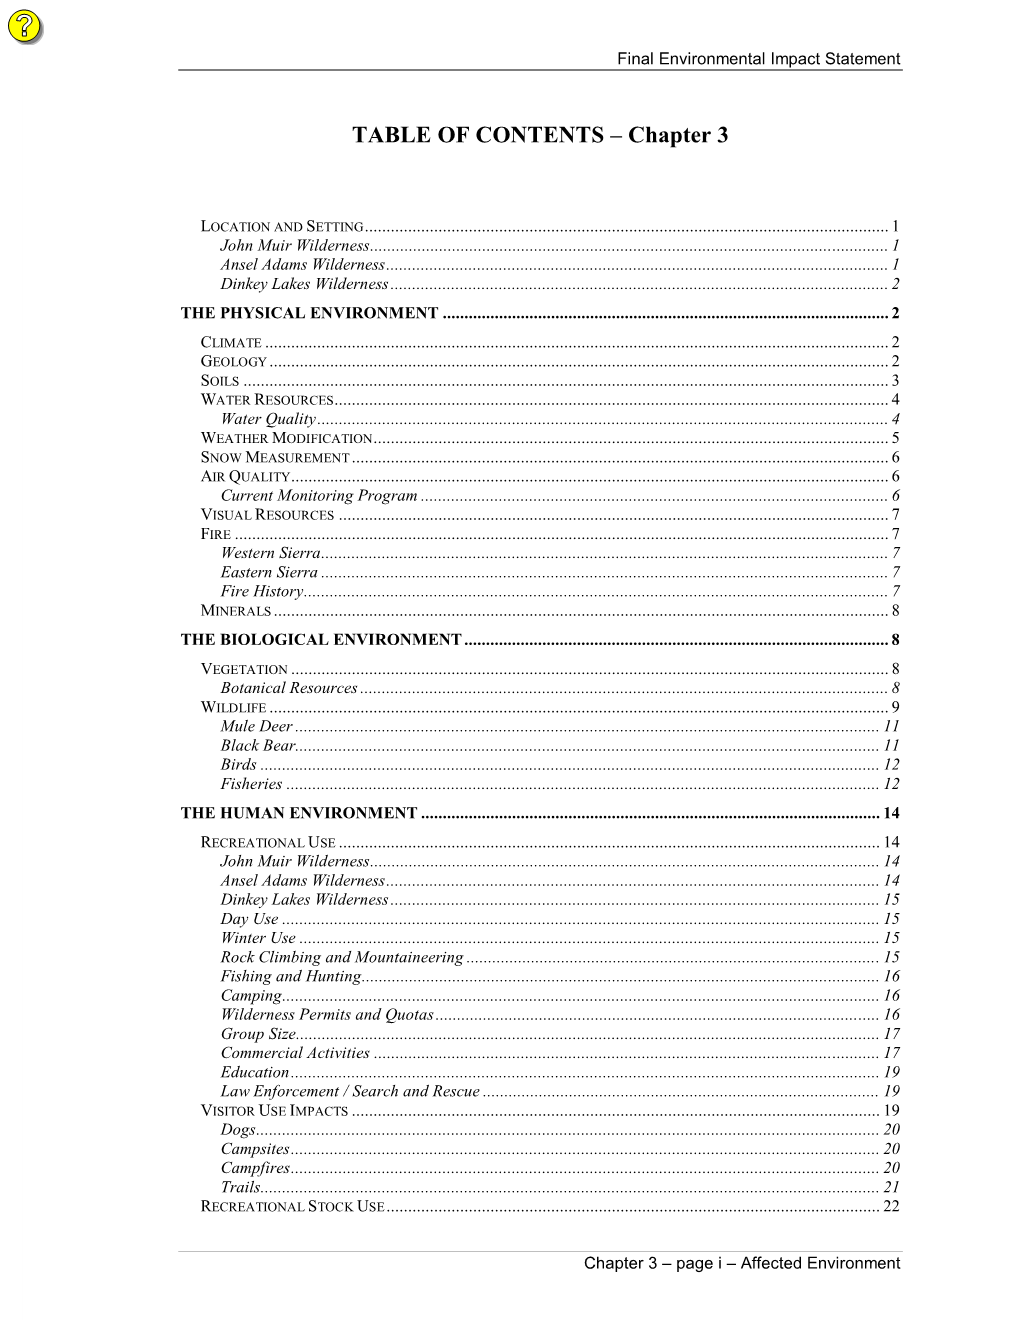 TABLE of CONTENTS – Chapter 3